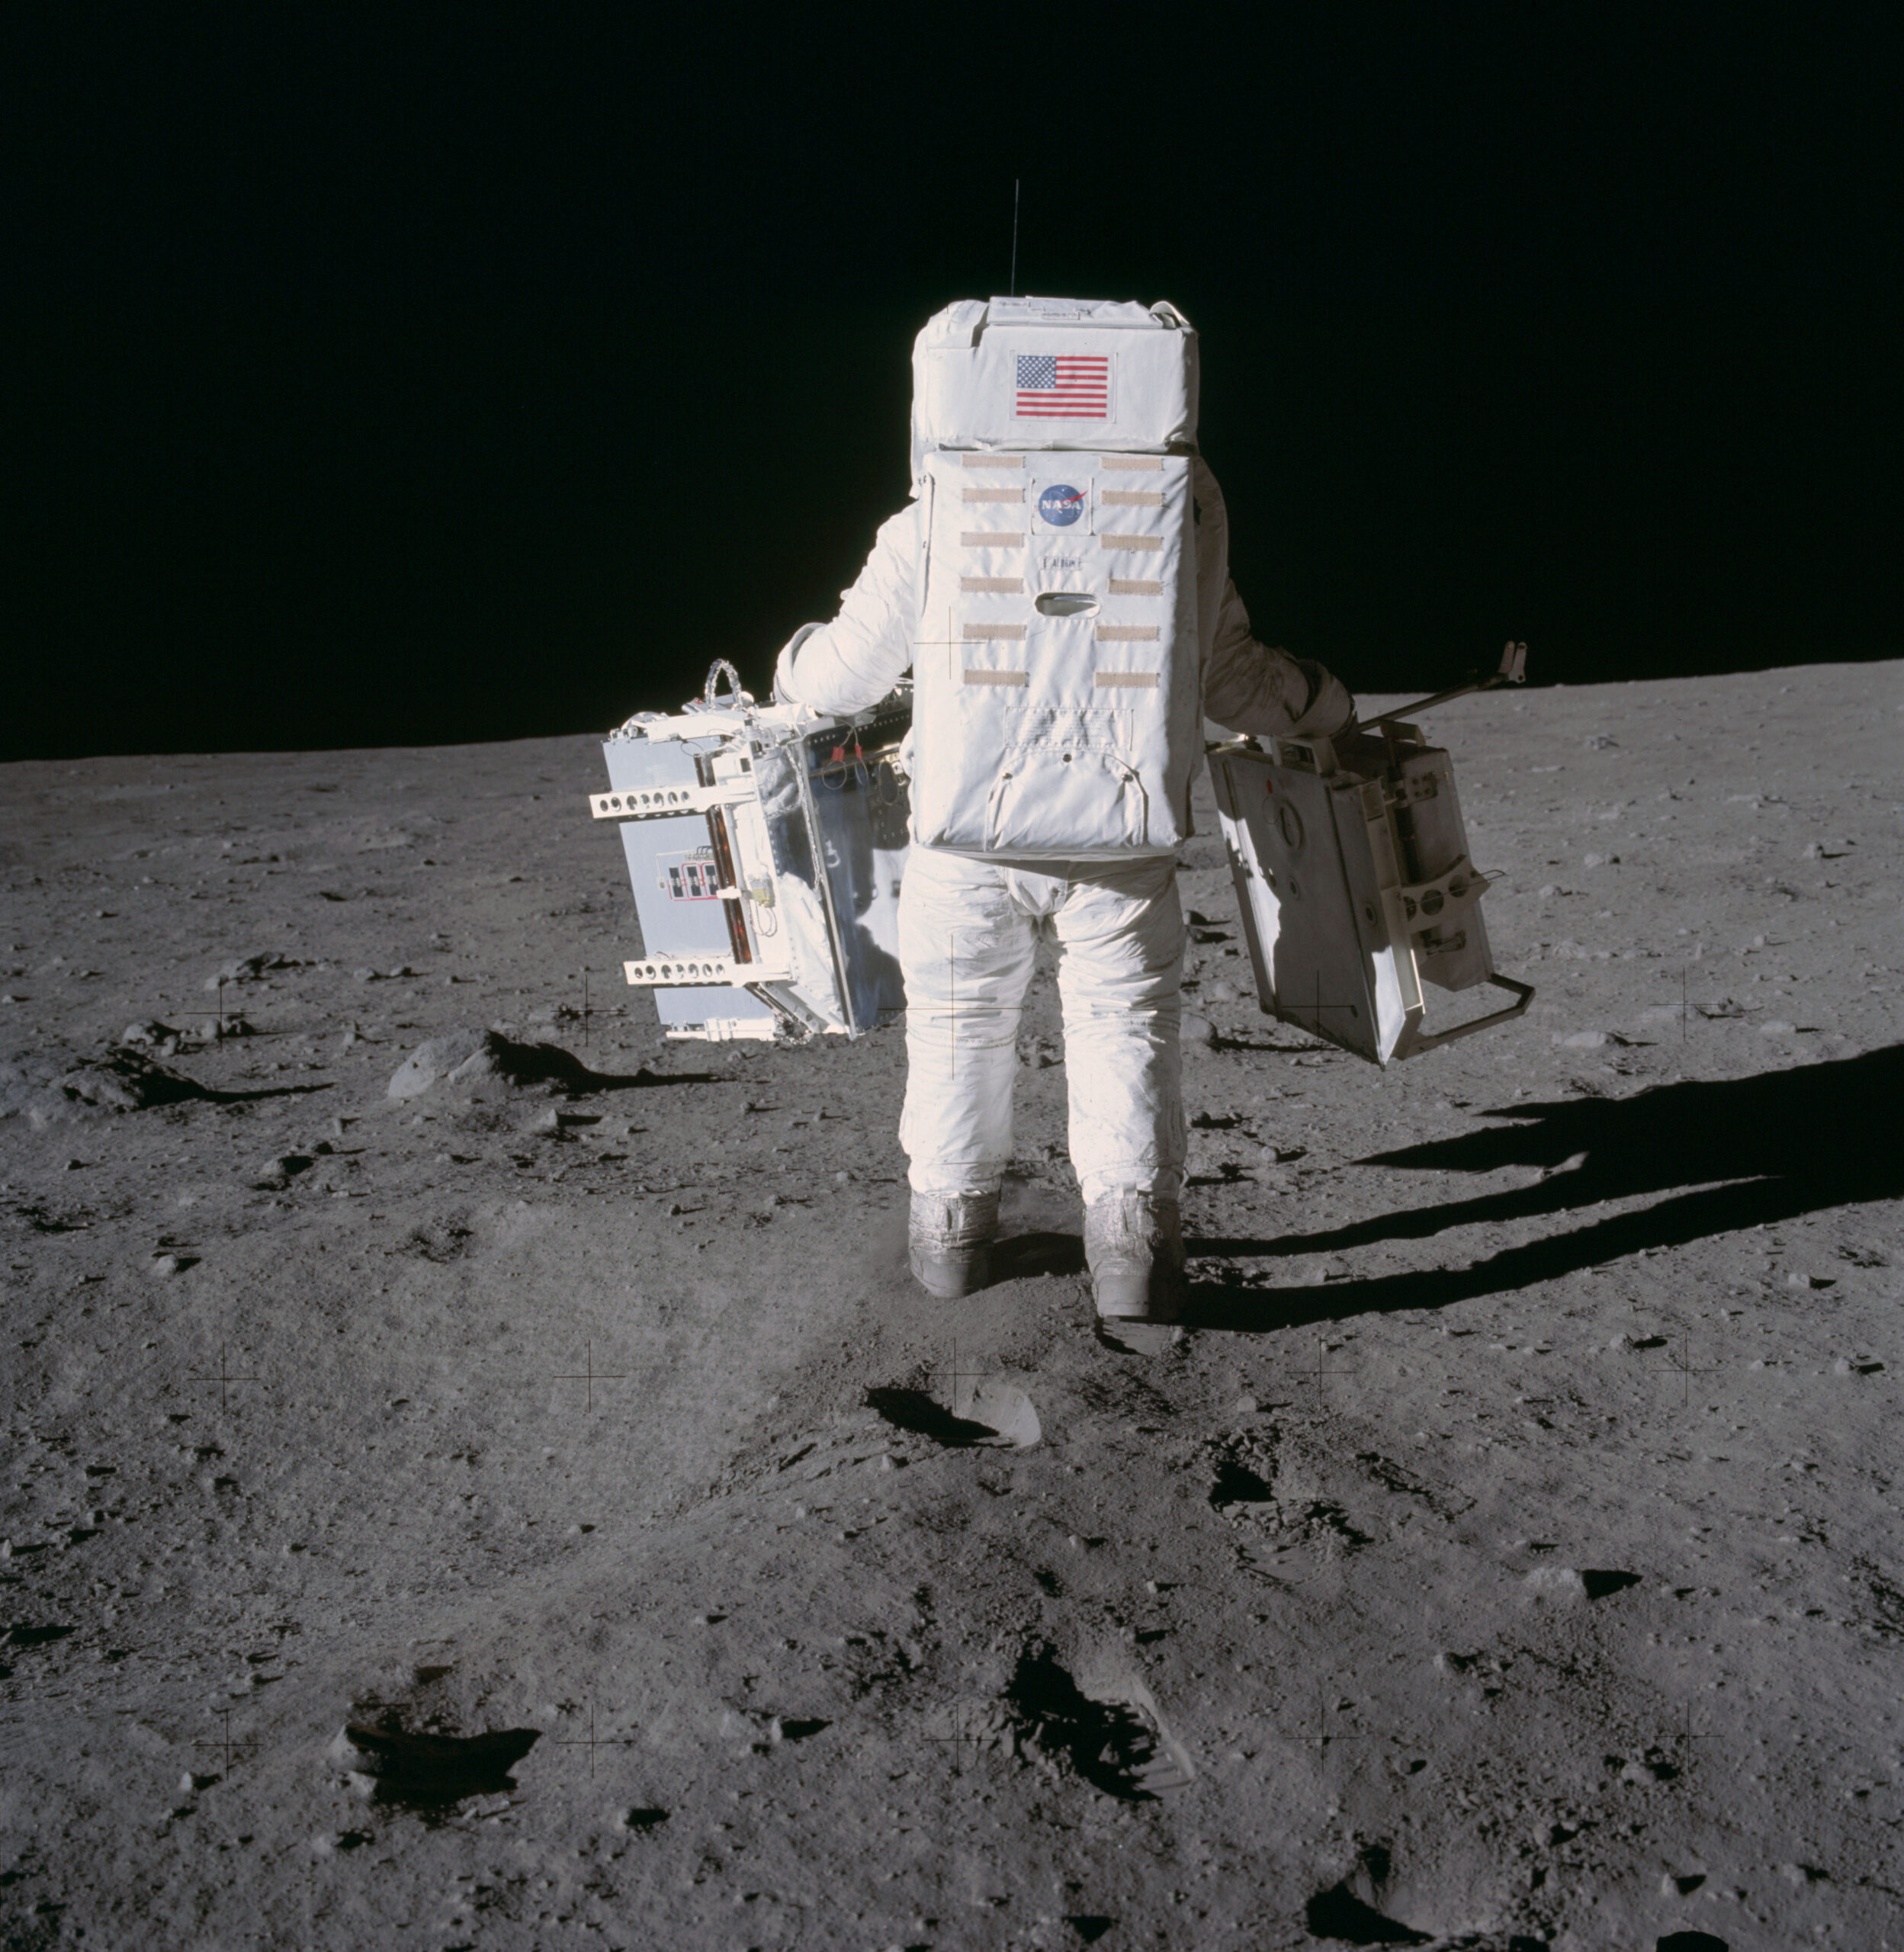 Why doesn’t anyone live on the moon yet?